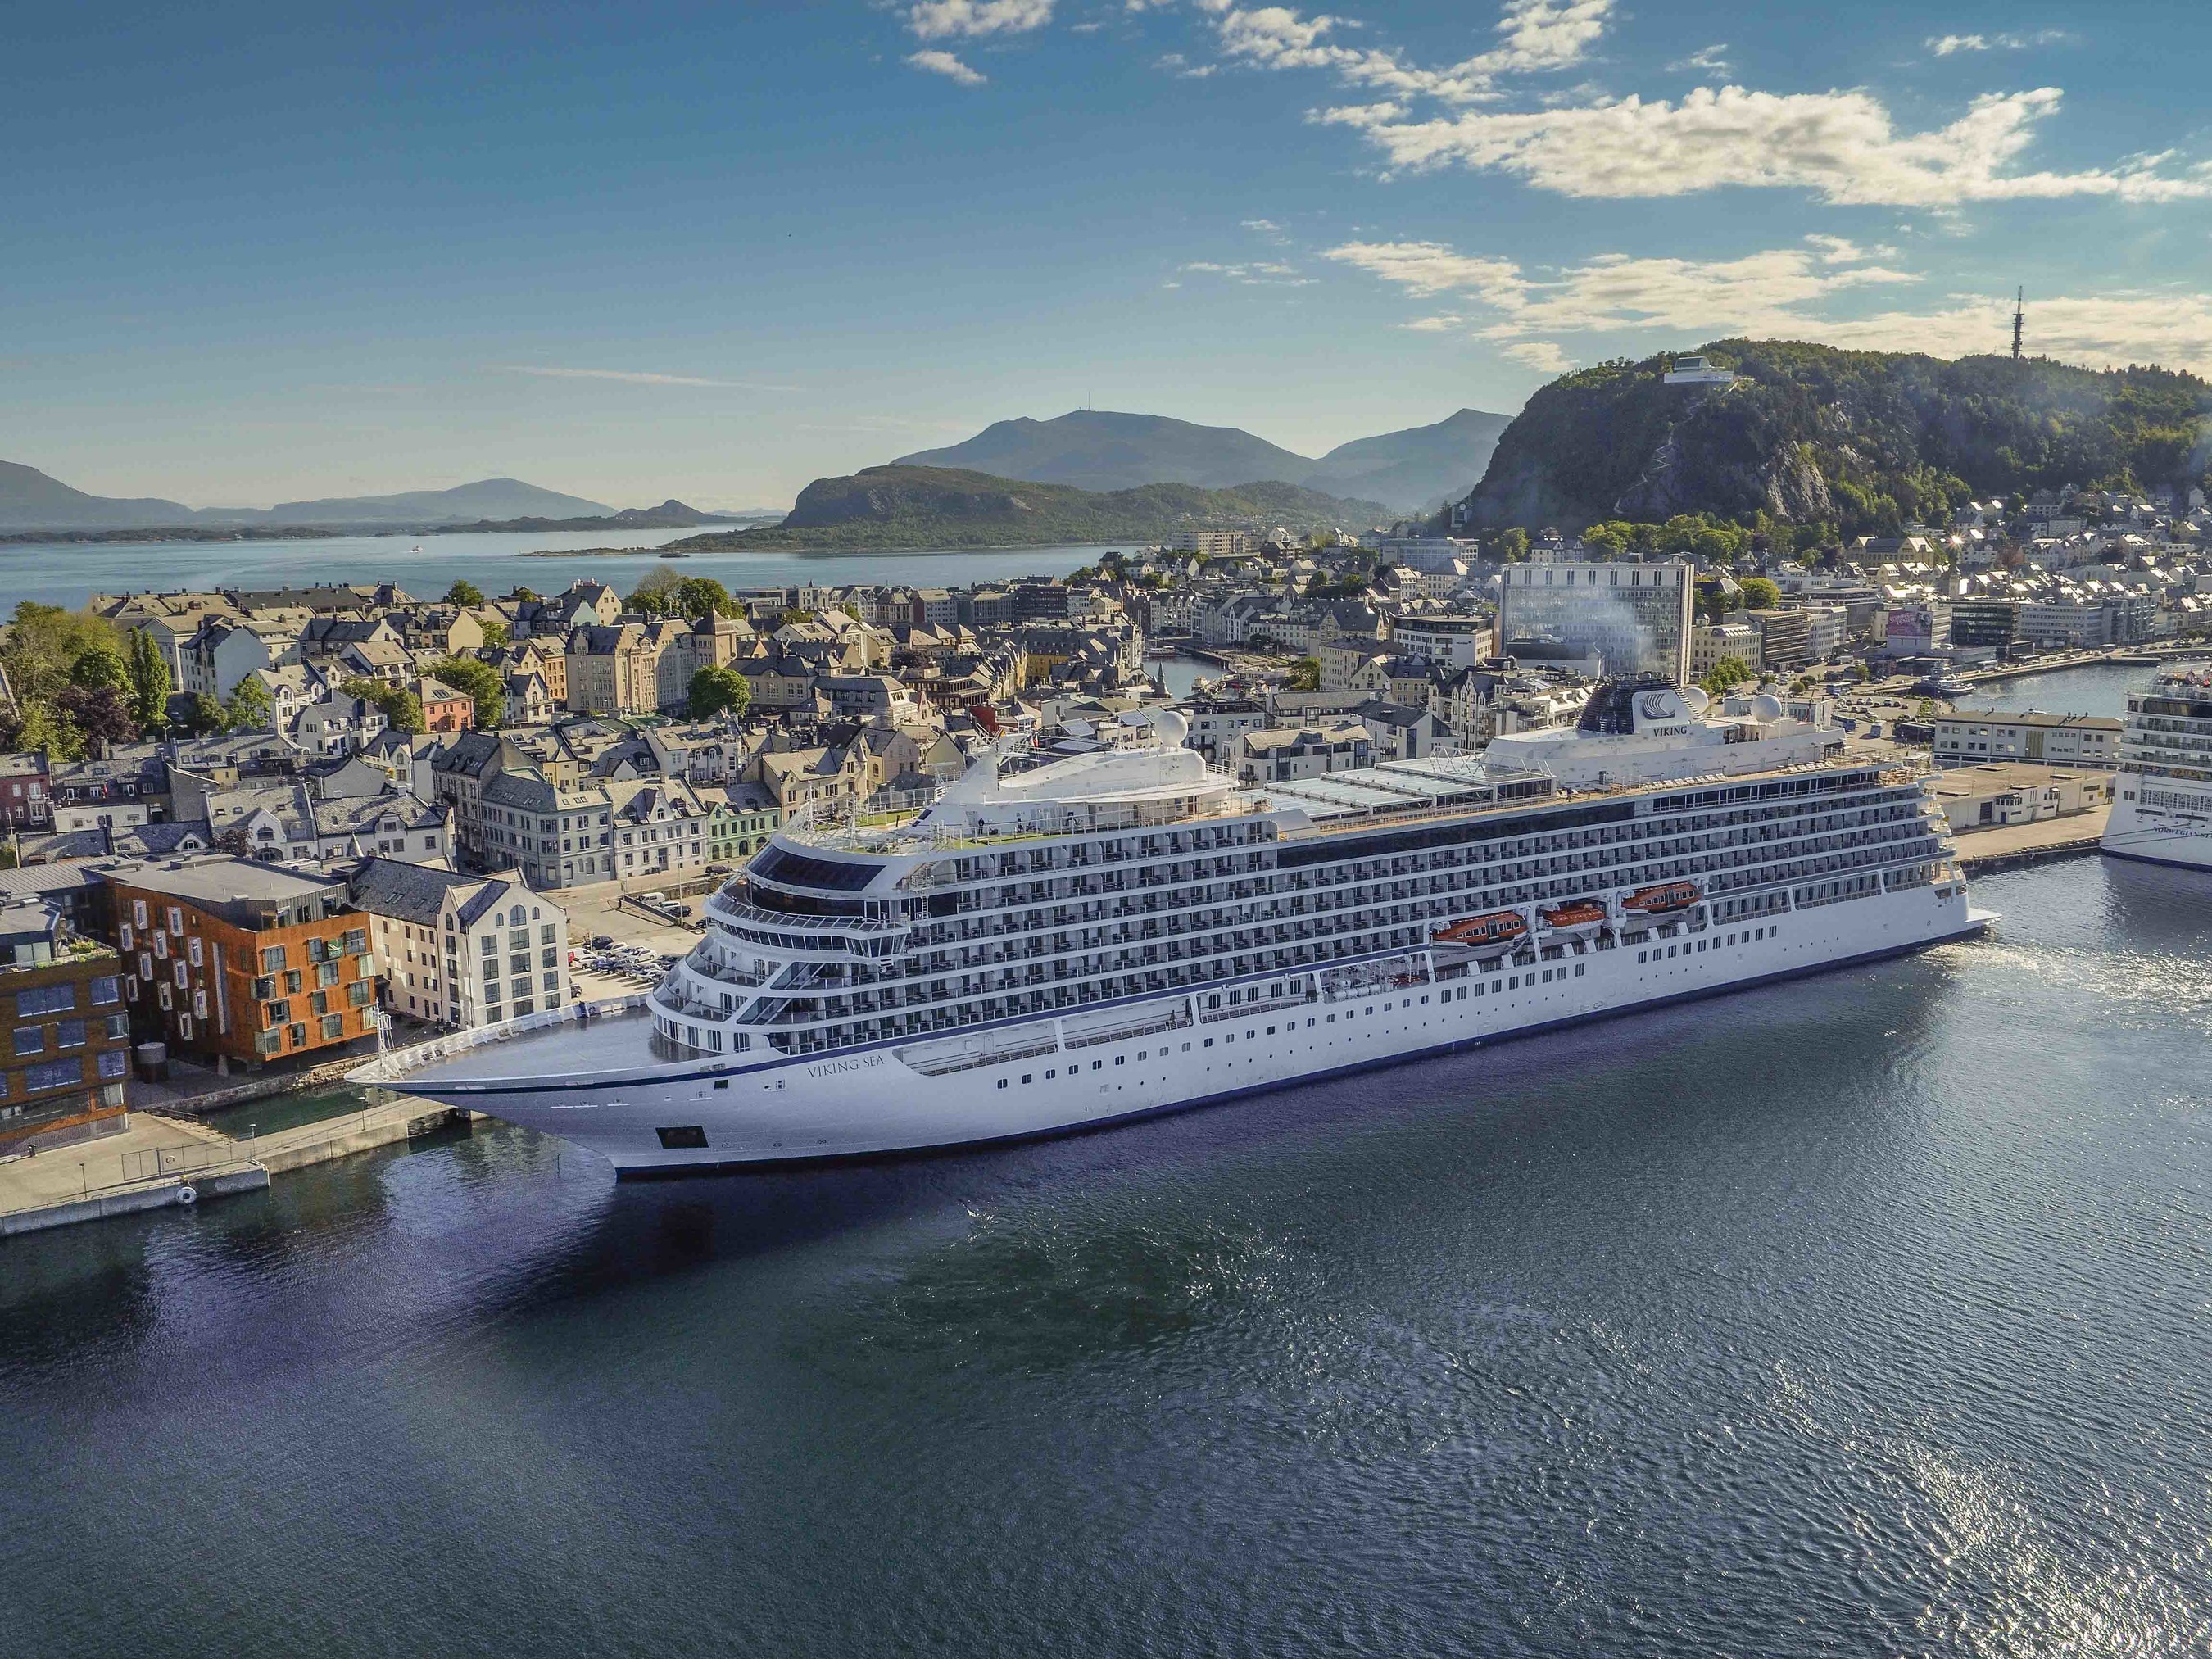 The new 930-passenger Viking Sea, docked in Alesund, Norway on the first sailing of Viking's new "Into the Midnight Sun" itinerary that cruises between London and Bergen, Norway.